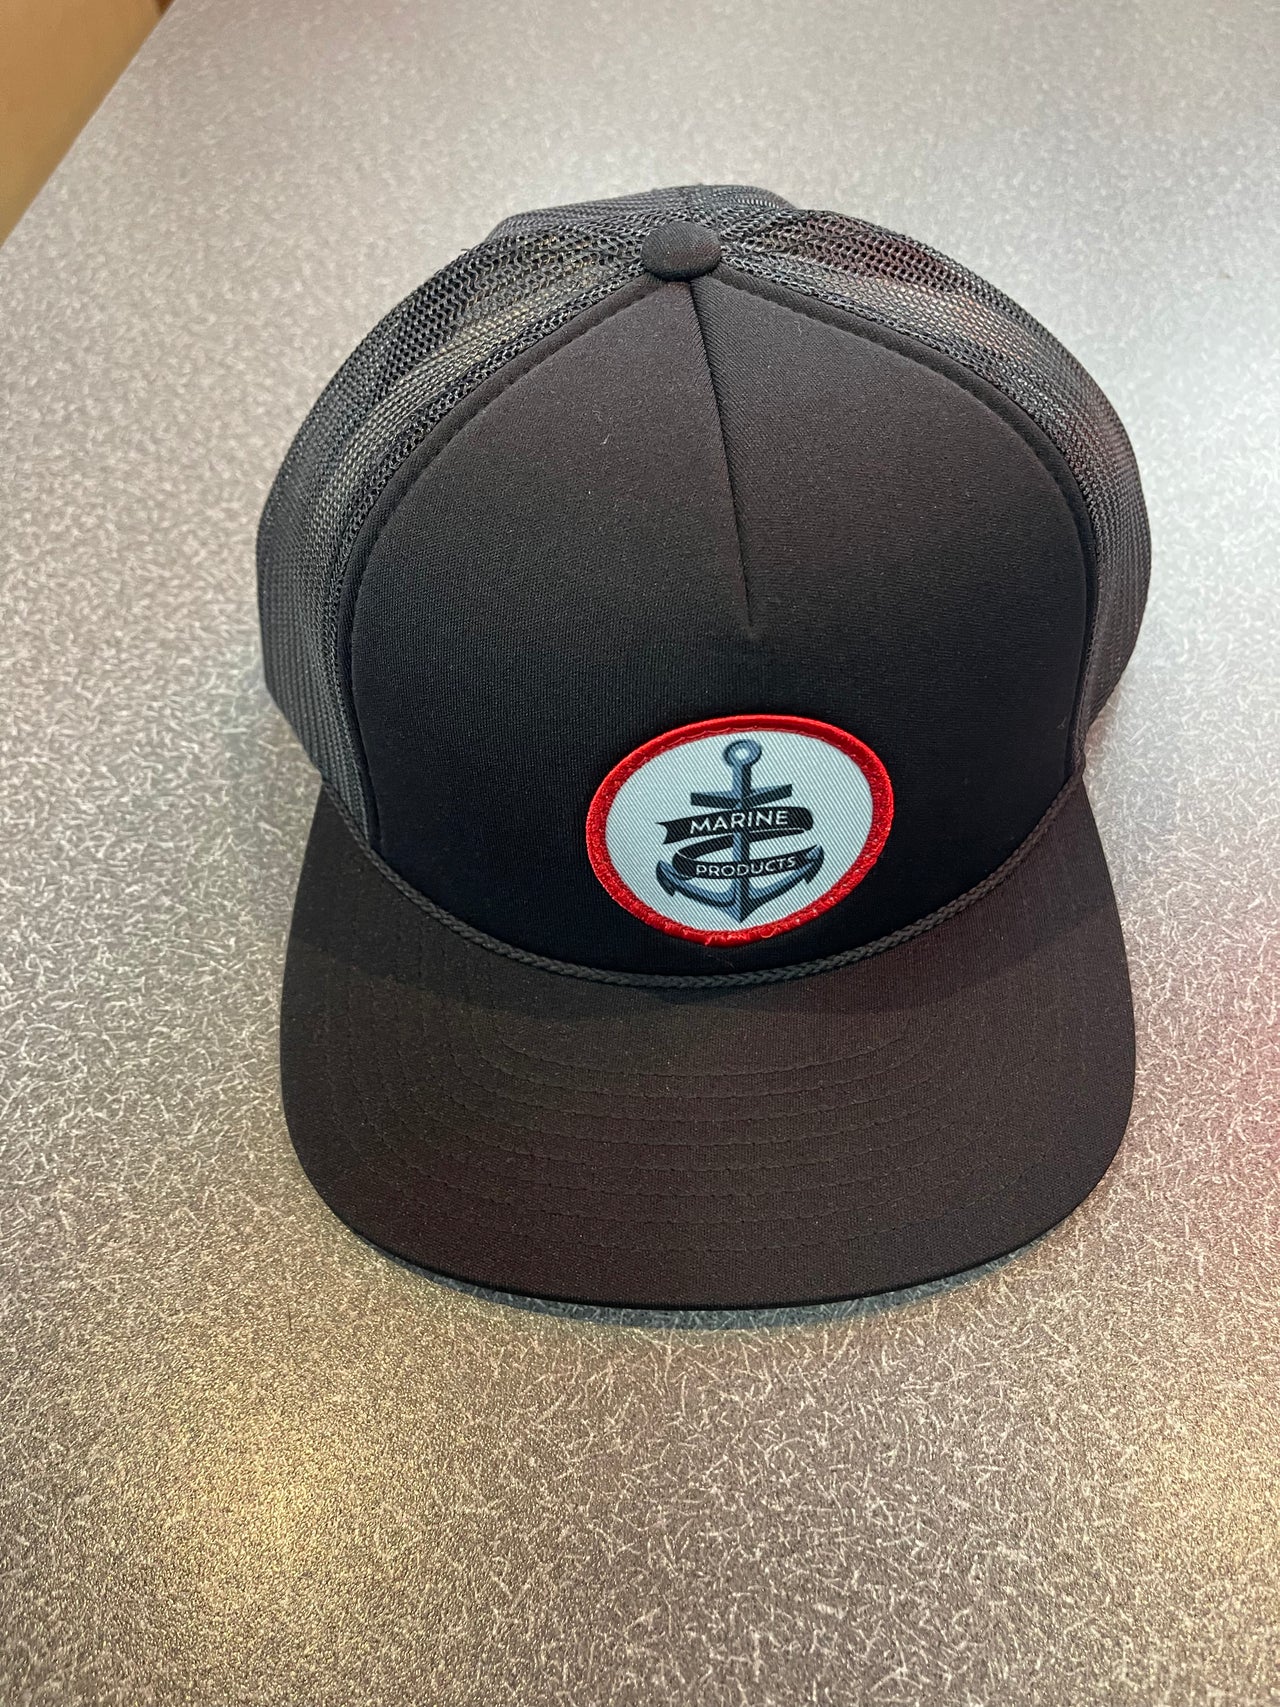 Marine Products Black Trucker Hat w/ Anchor Patch